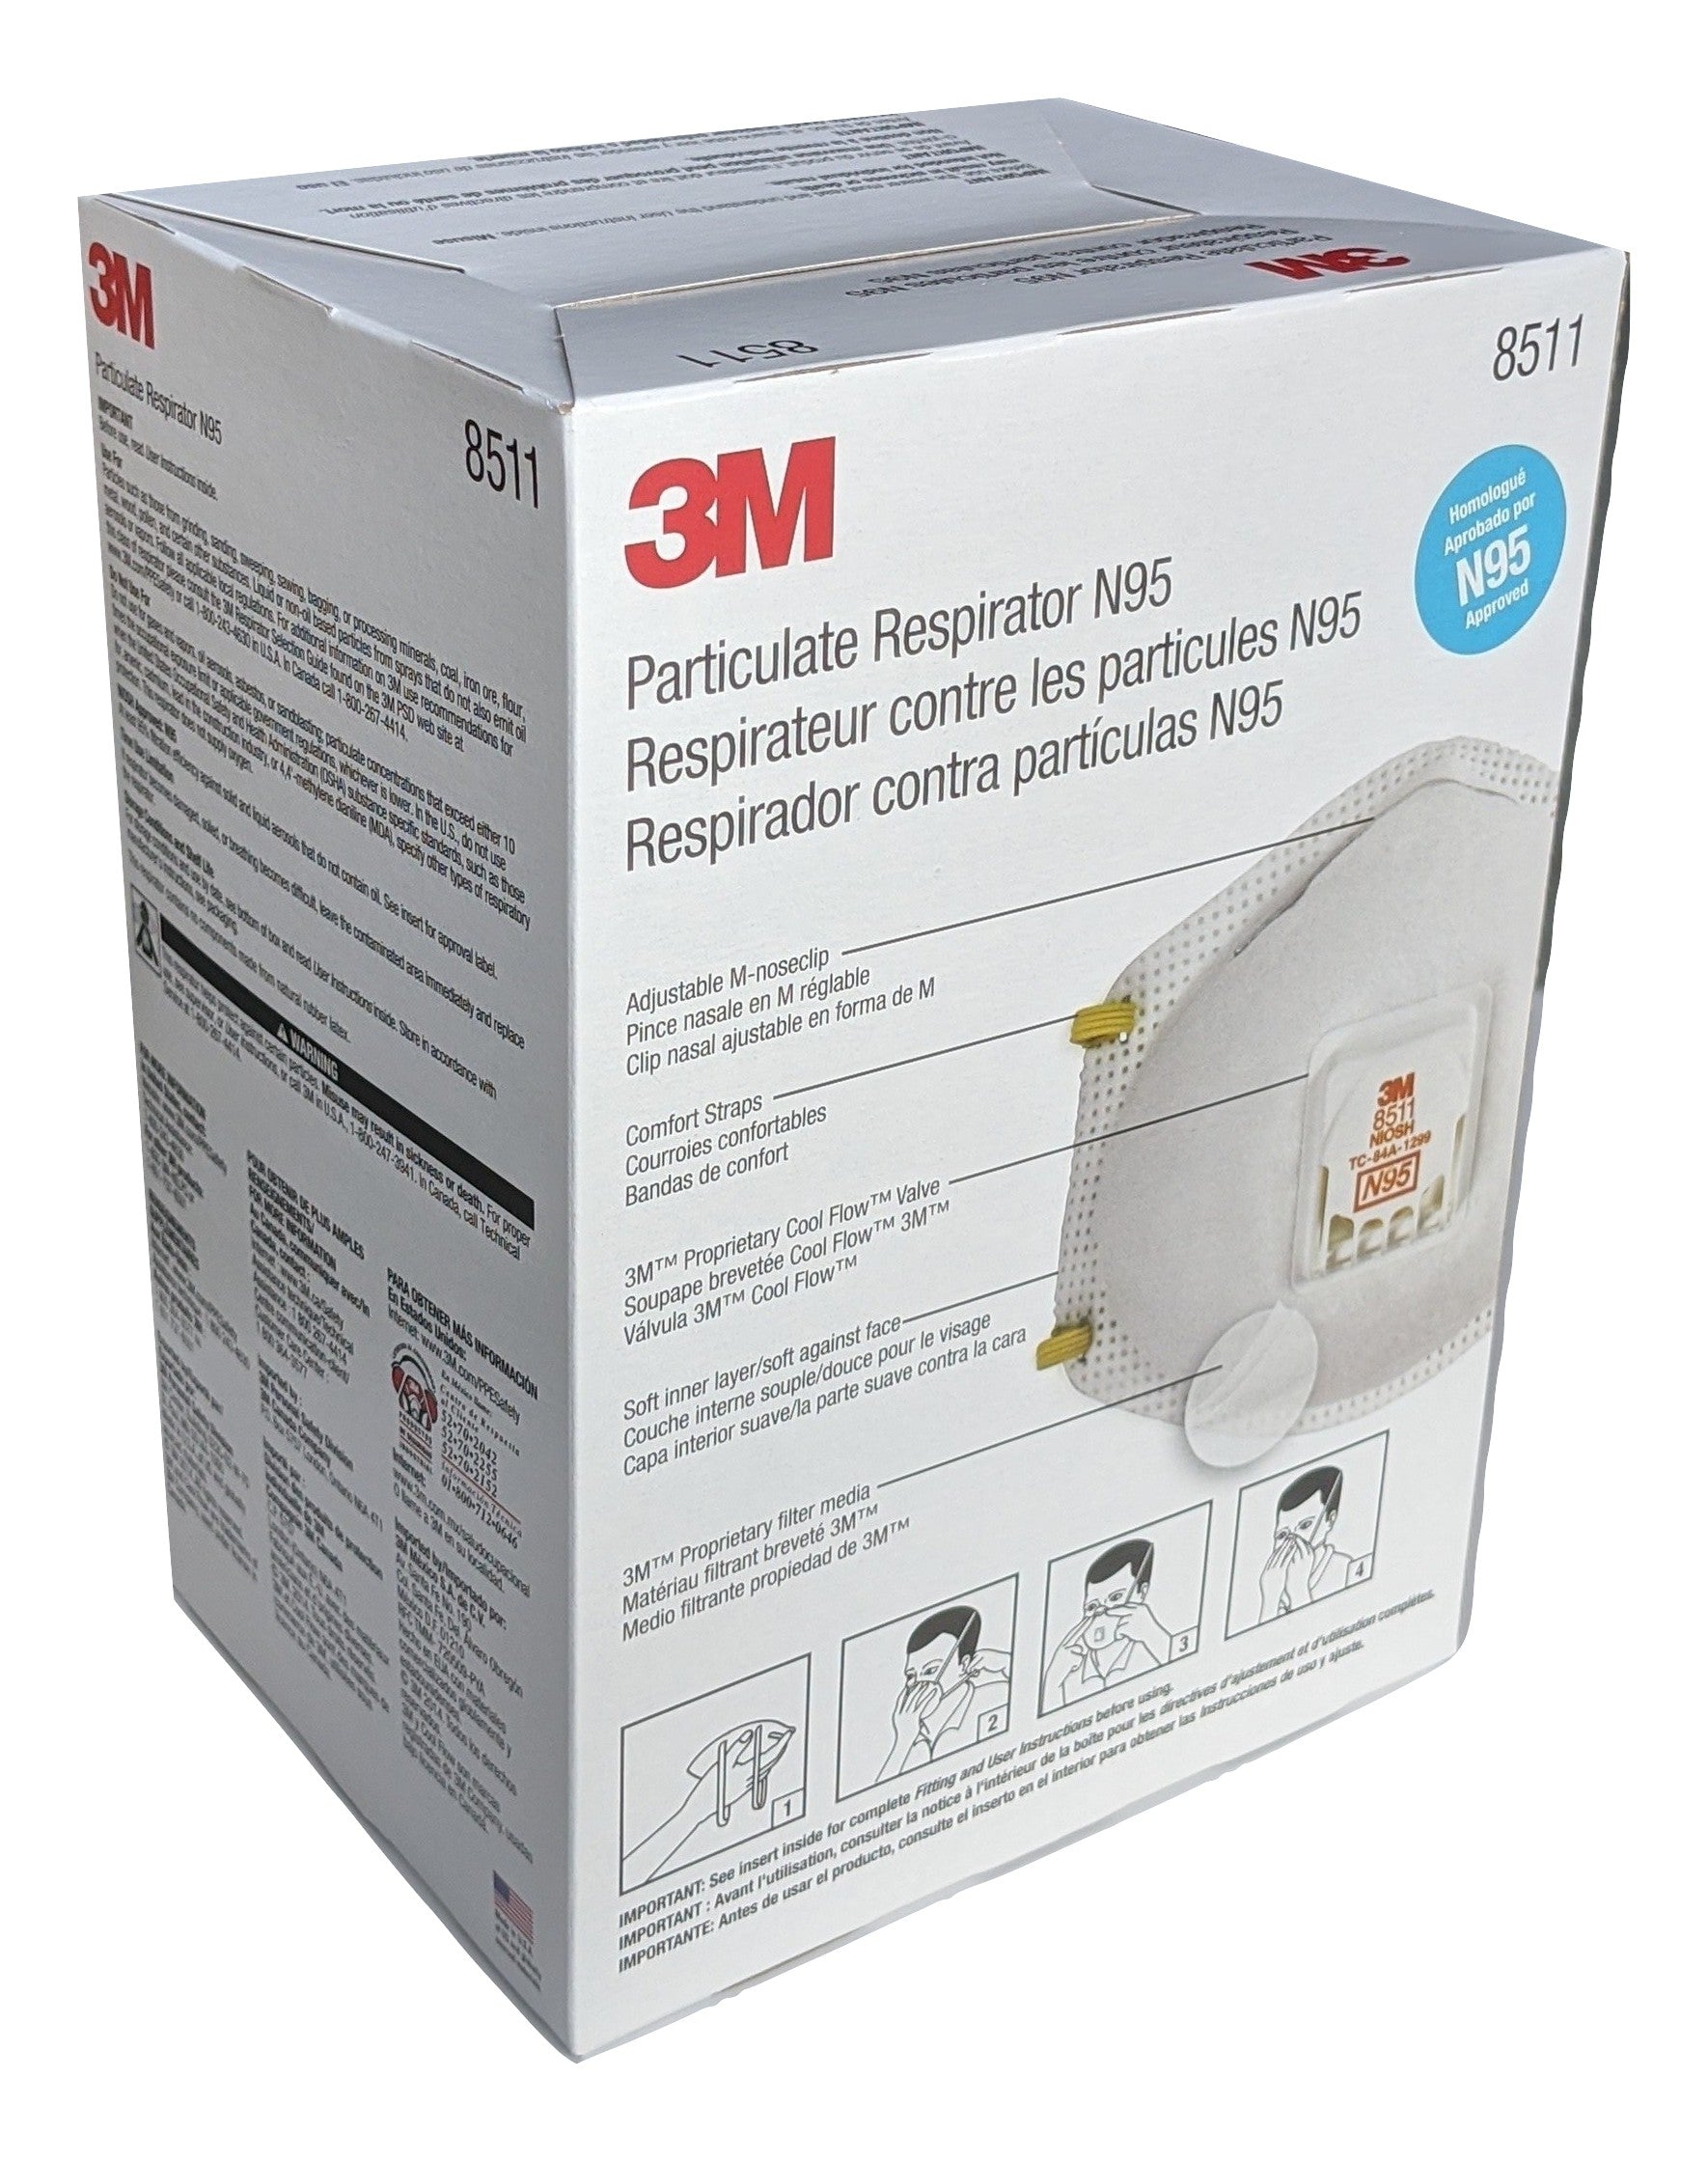 3M 8511 N95 Particulate Respirator Mask, NIOSH approved - 80 pcs (Case of 8 Boxes)